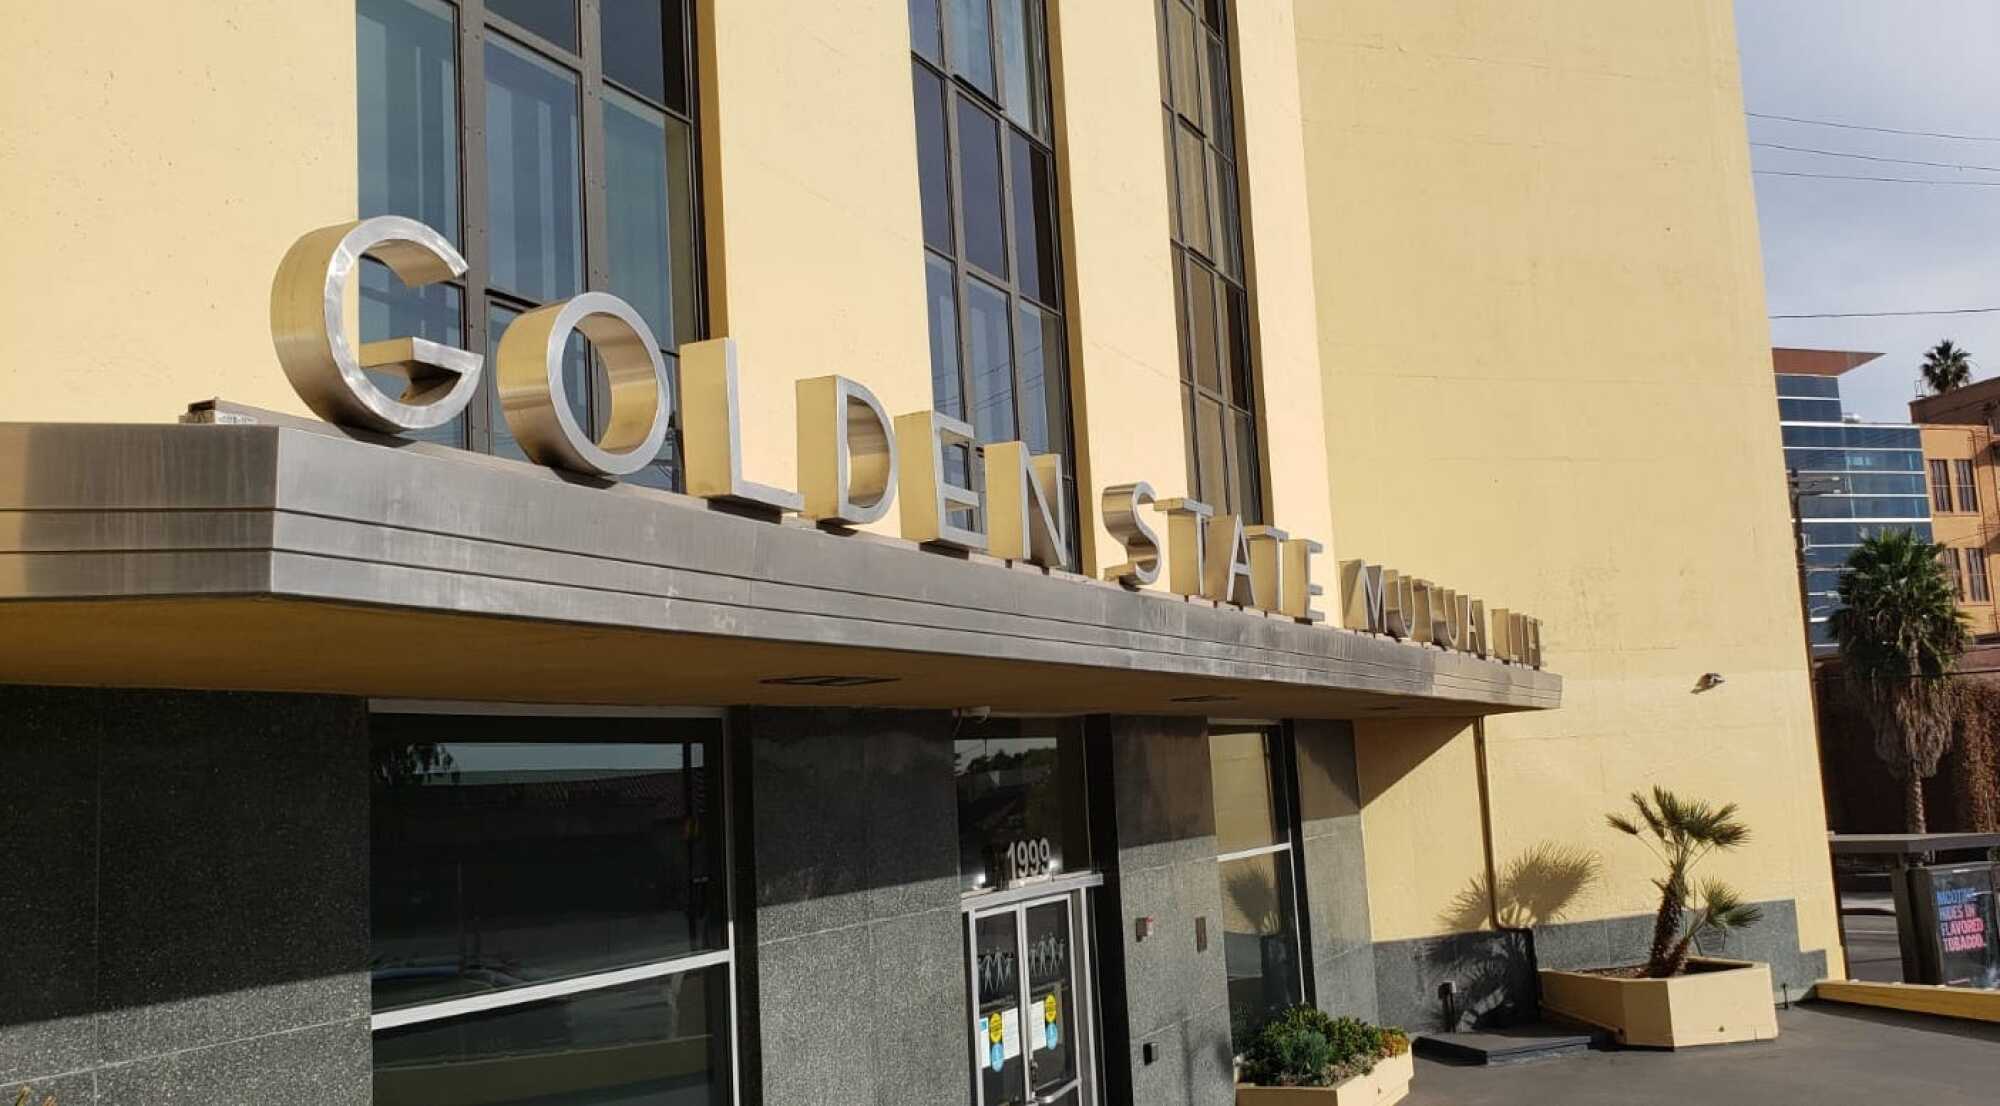 A side view shows a row of elegant Modernist letters spelling out the name of the Golden State Mutual Co.